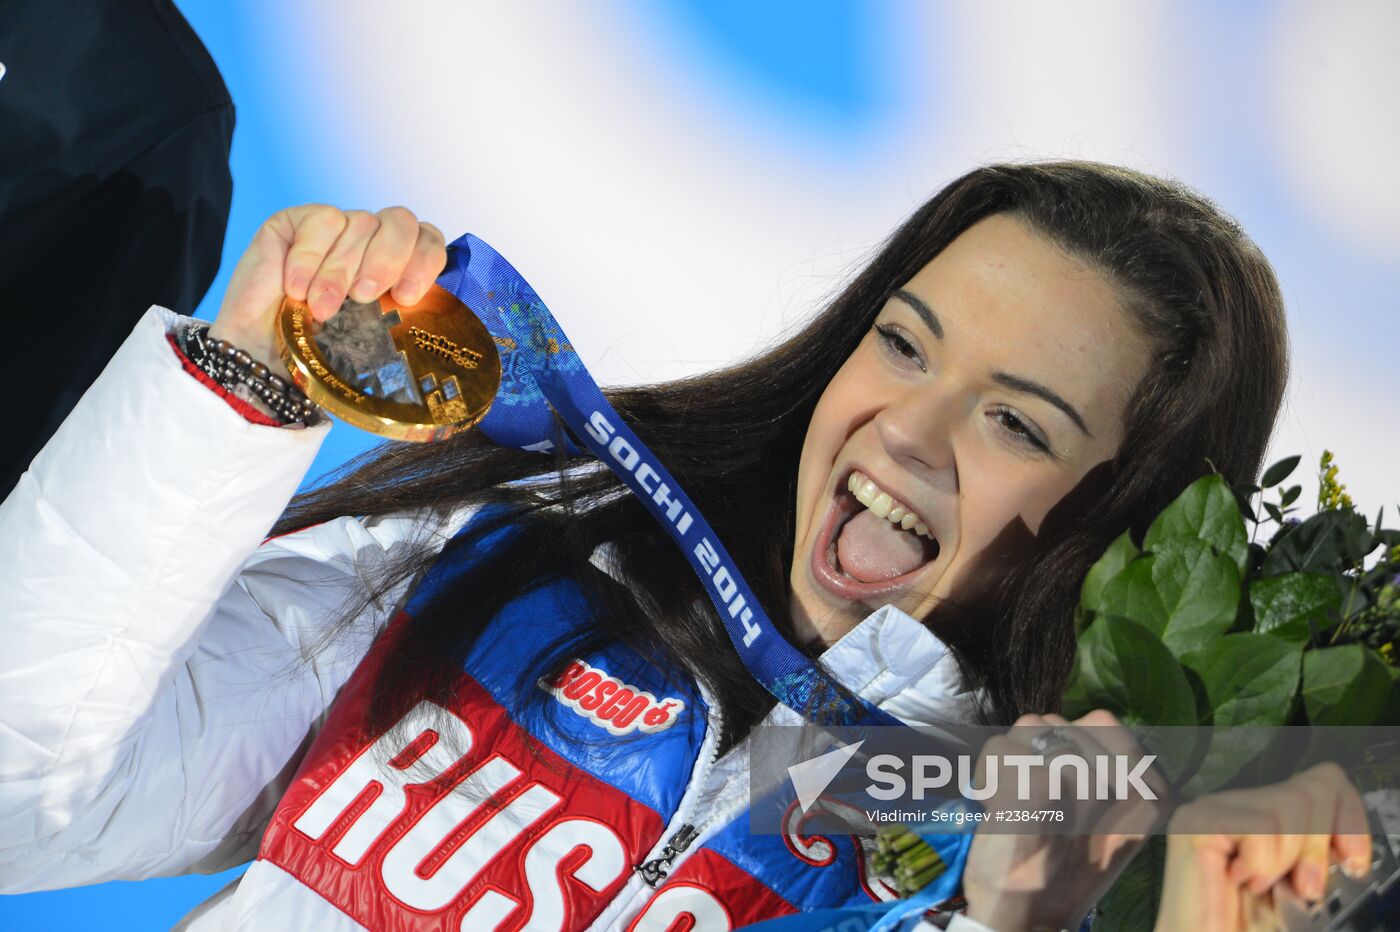 2014 Winter Olympics. Medal ceremony. Day Fourteen